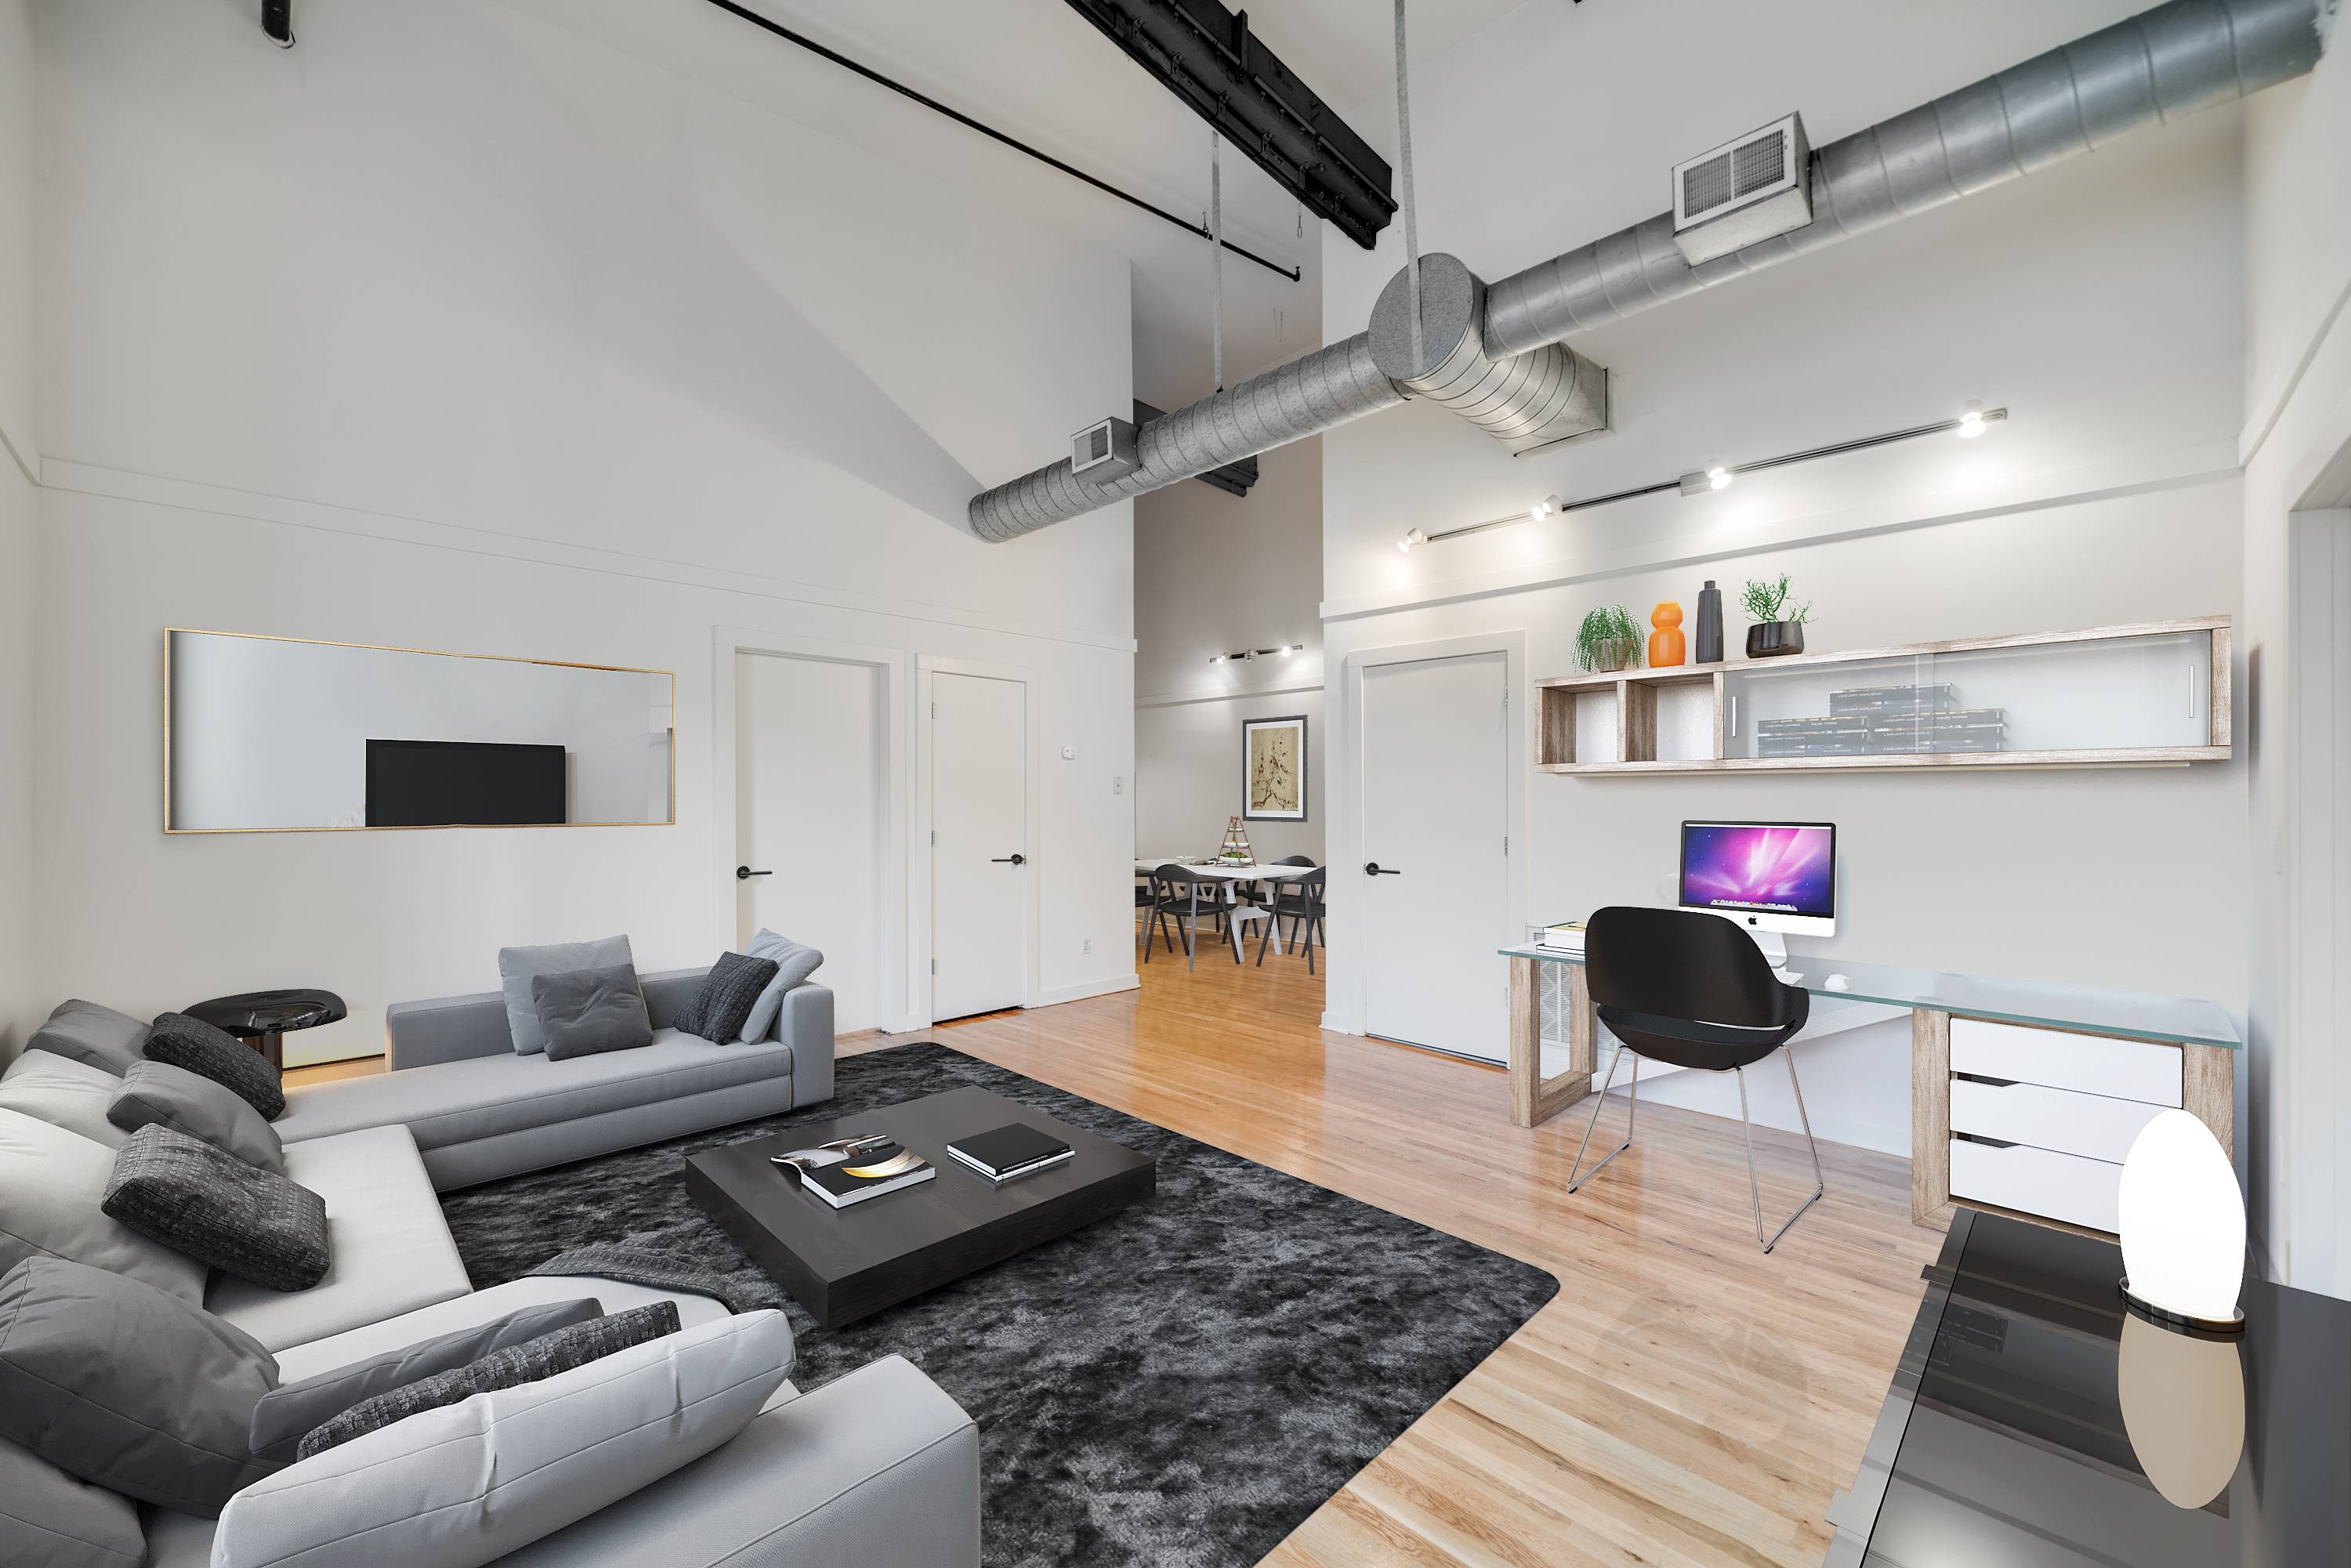 One of a Kind Brand New Renovated 2BR Loft in Hoboken NJ!  Laundry in Unit!  Central AC!